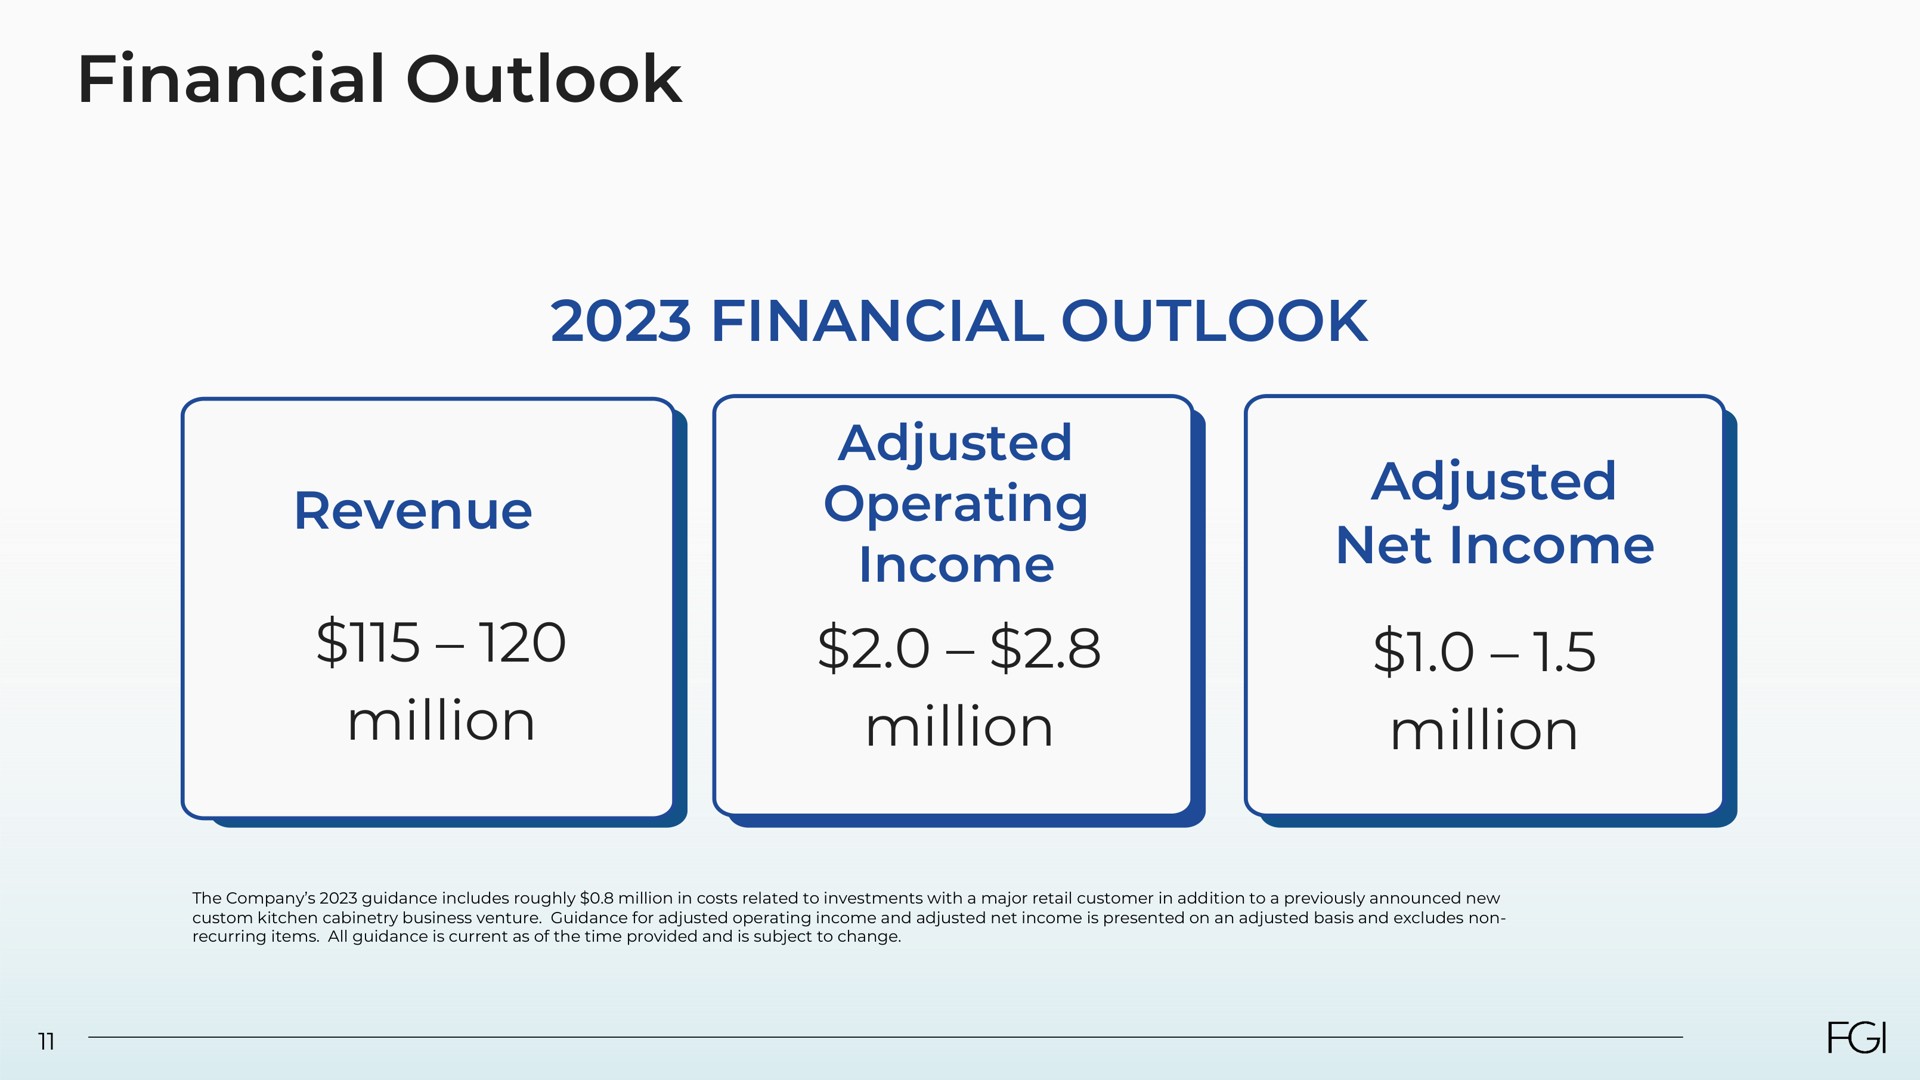 financial outlook financial outlook revenue million adjusted operating income million adjusted net income million | FGI Industries